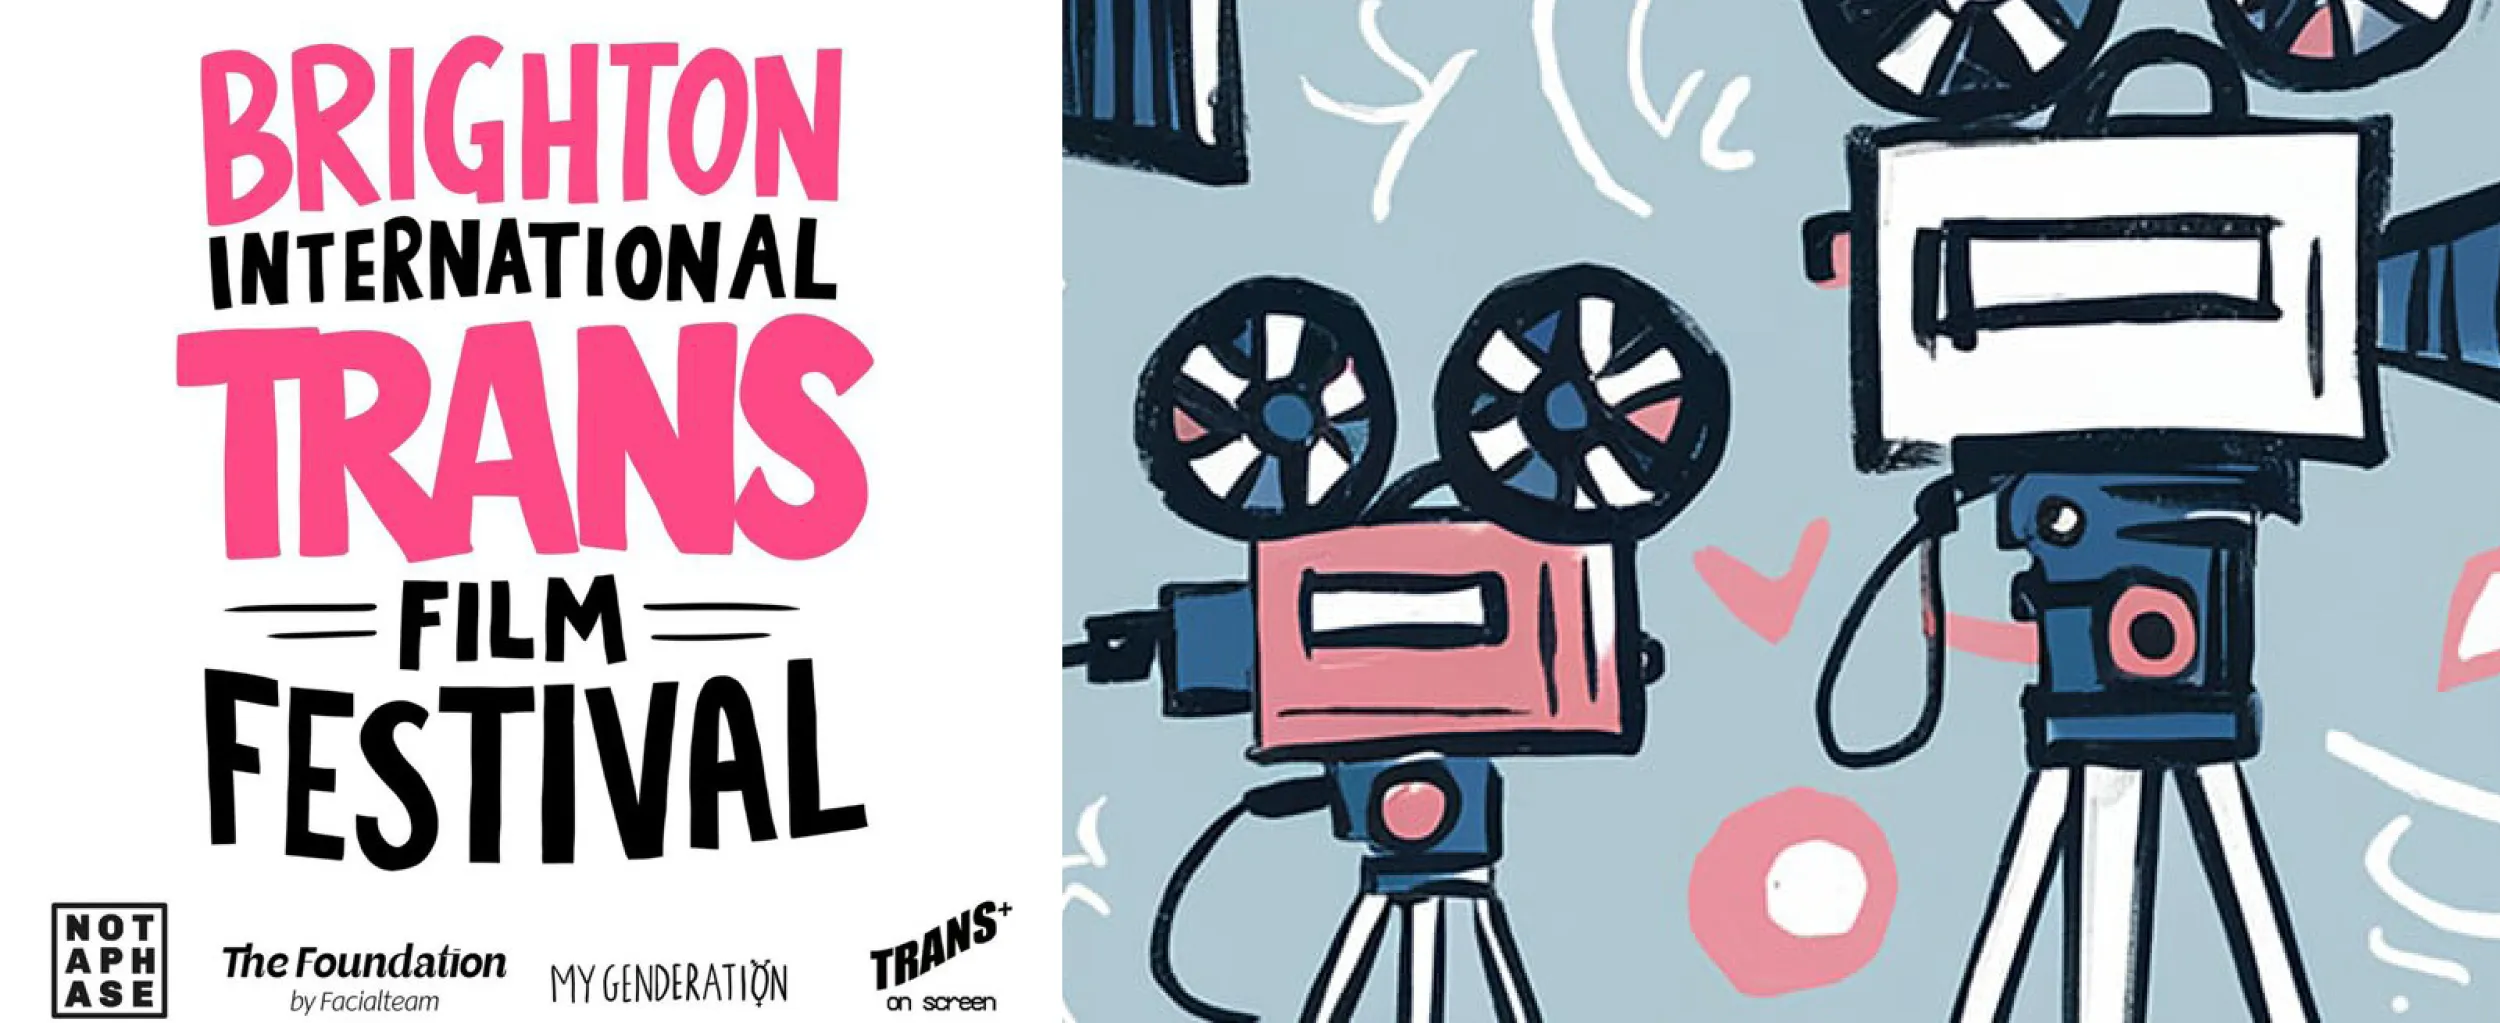 This Friday – a DOUBLE BILL of awesome trans film at the Duke of York Cinema as part of the 11th Annual Brighton International Trans Film Festival